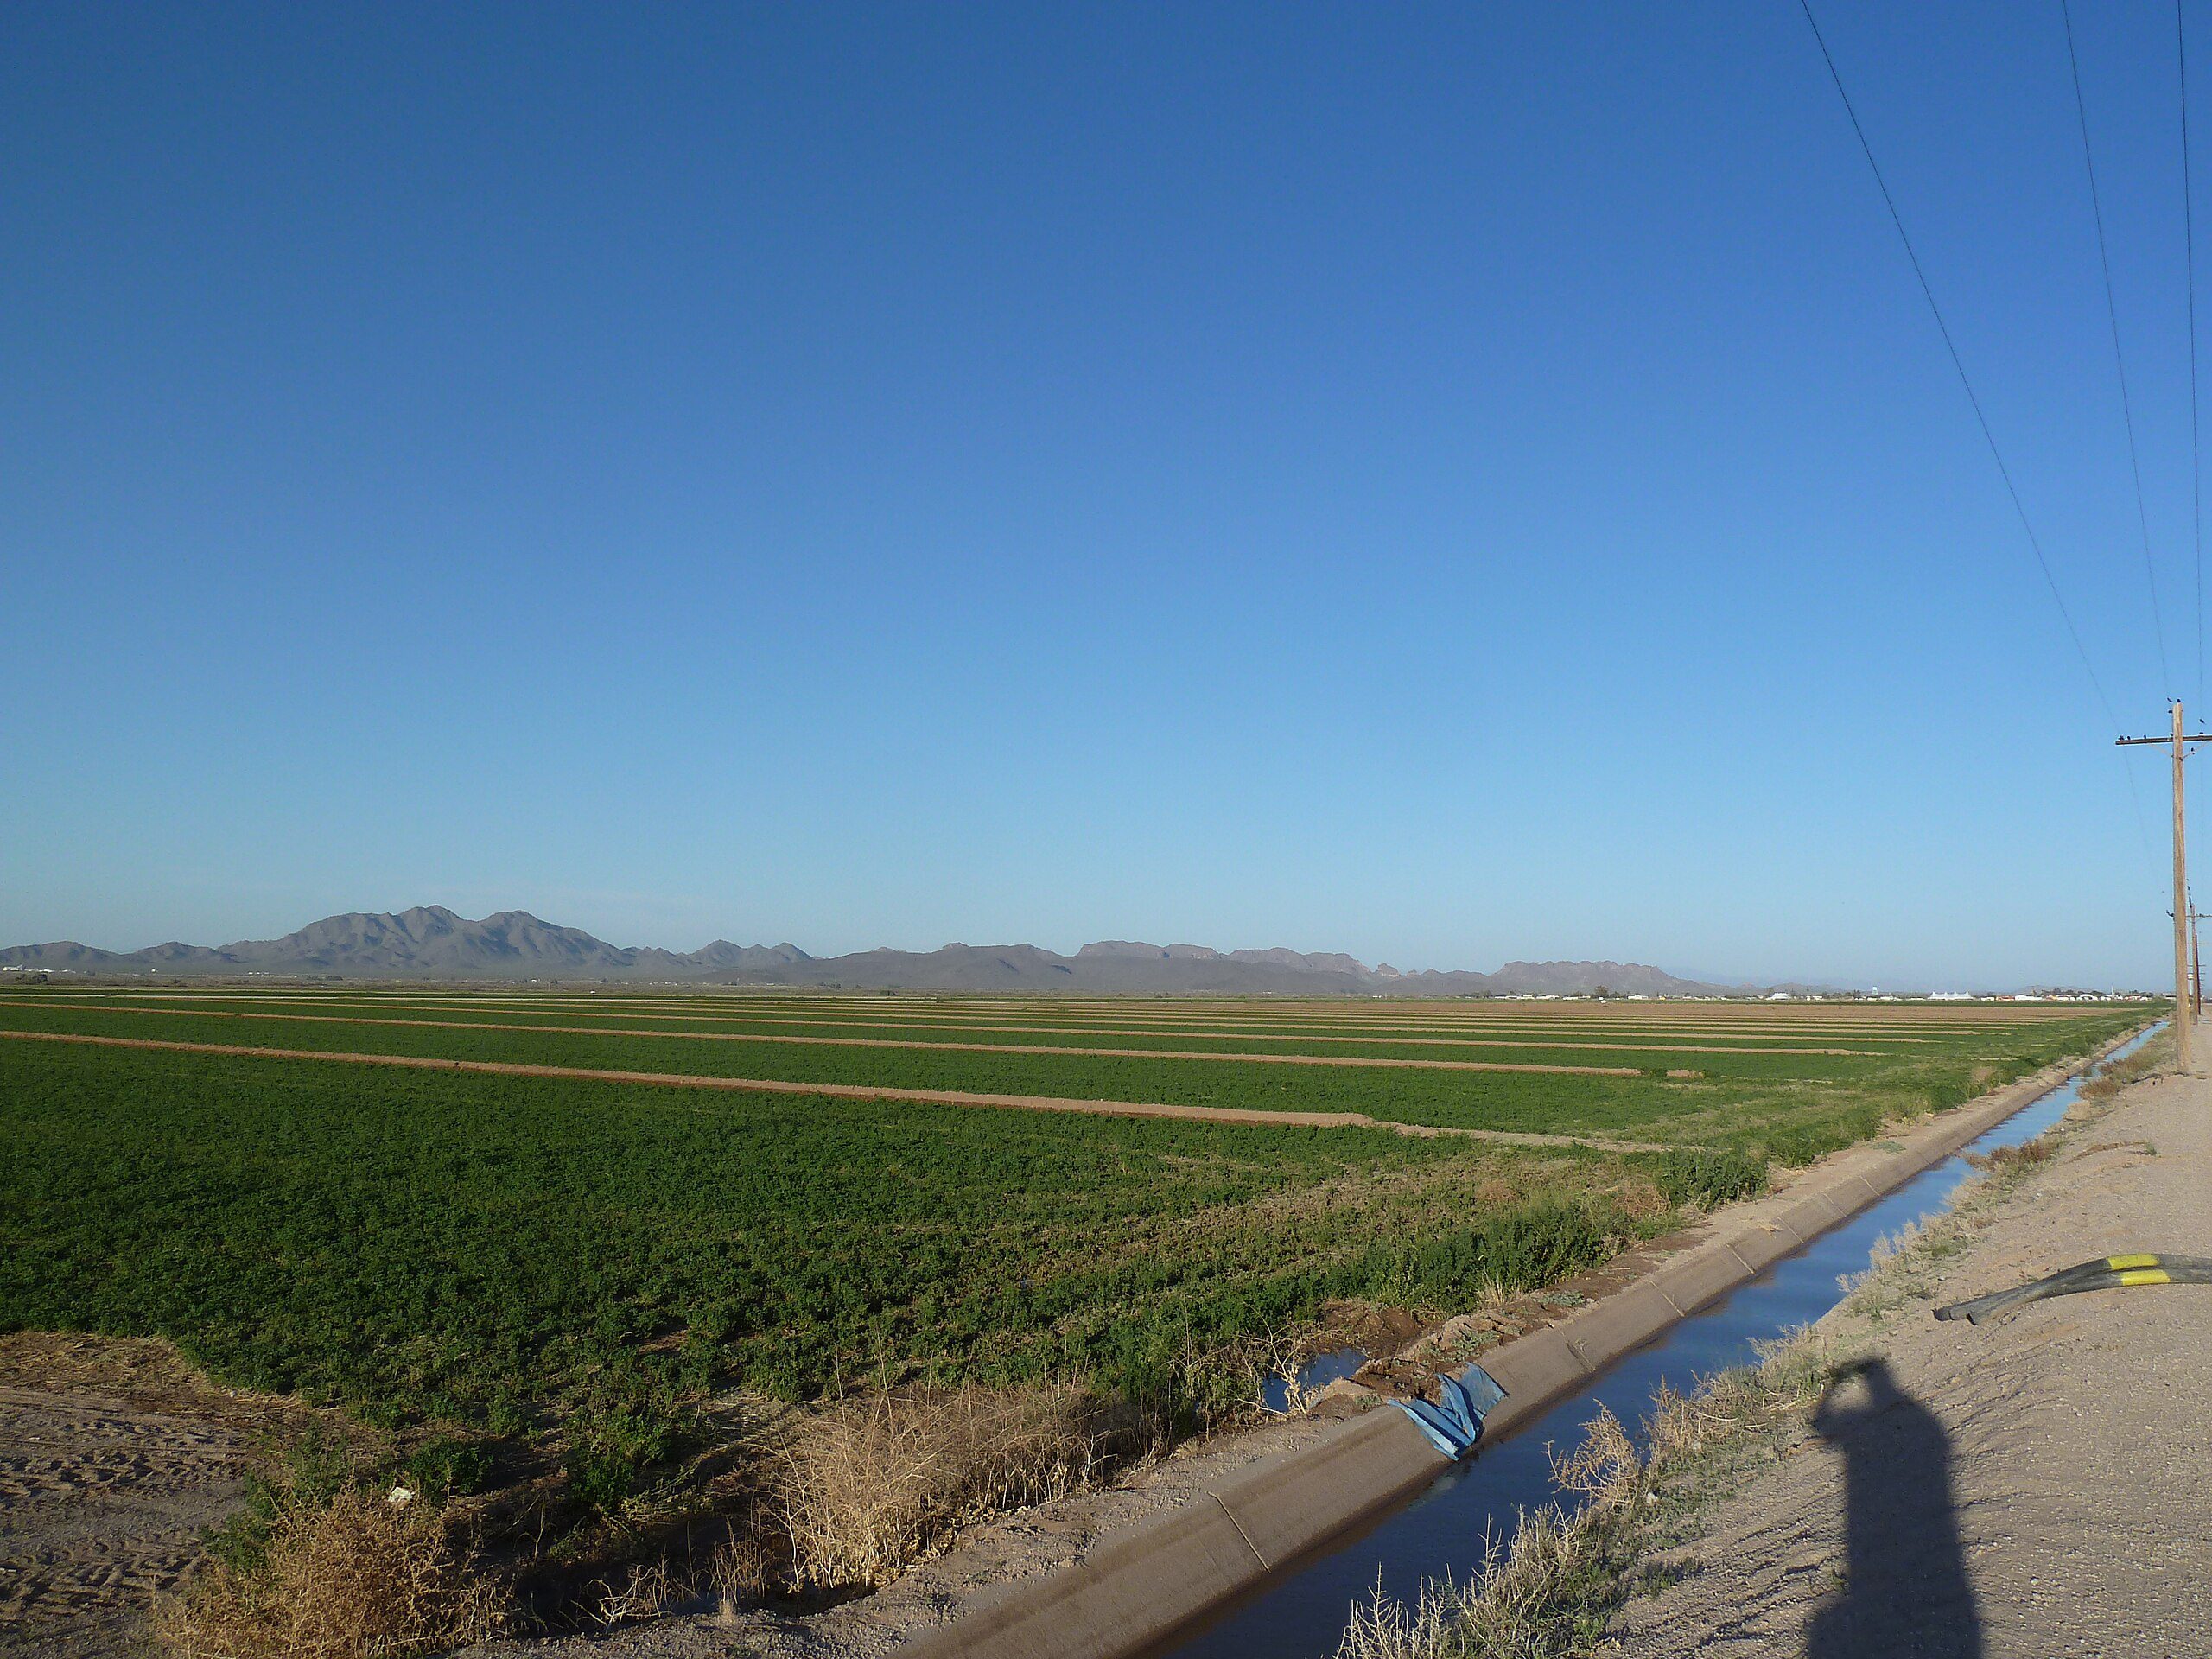 Gila Farms operated by the Gila River Indian Community